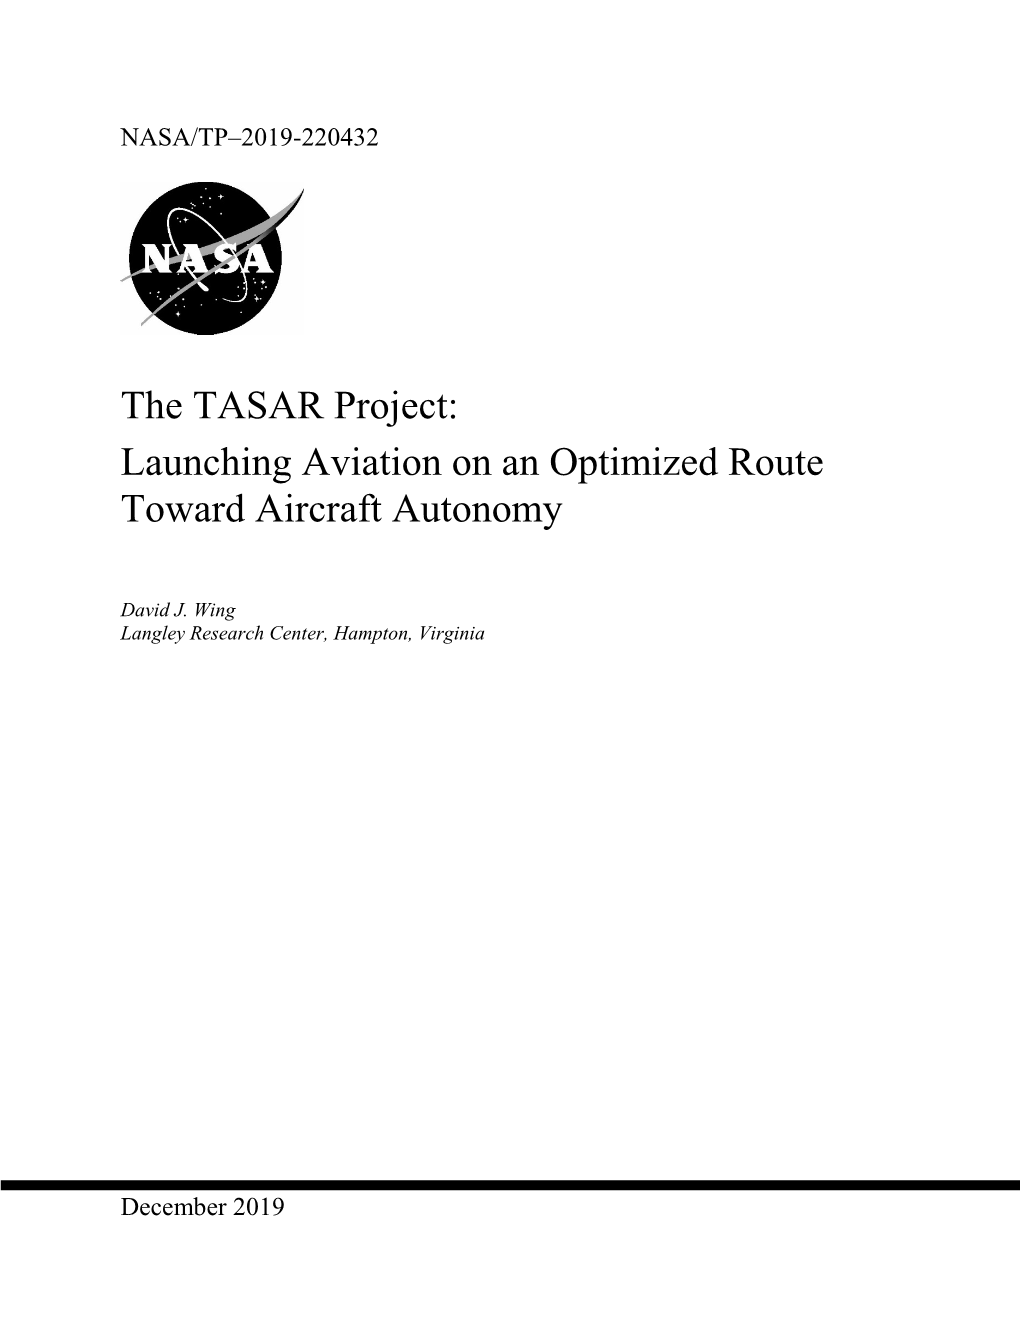 Launching Aviation on an Optimized Route Toward Aircraft Autonomy